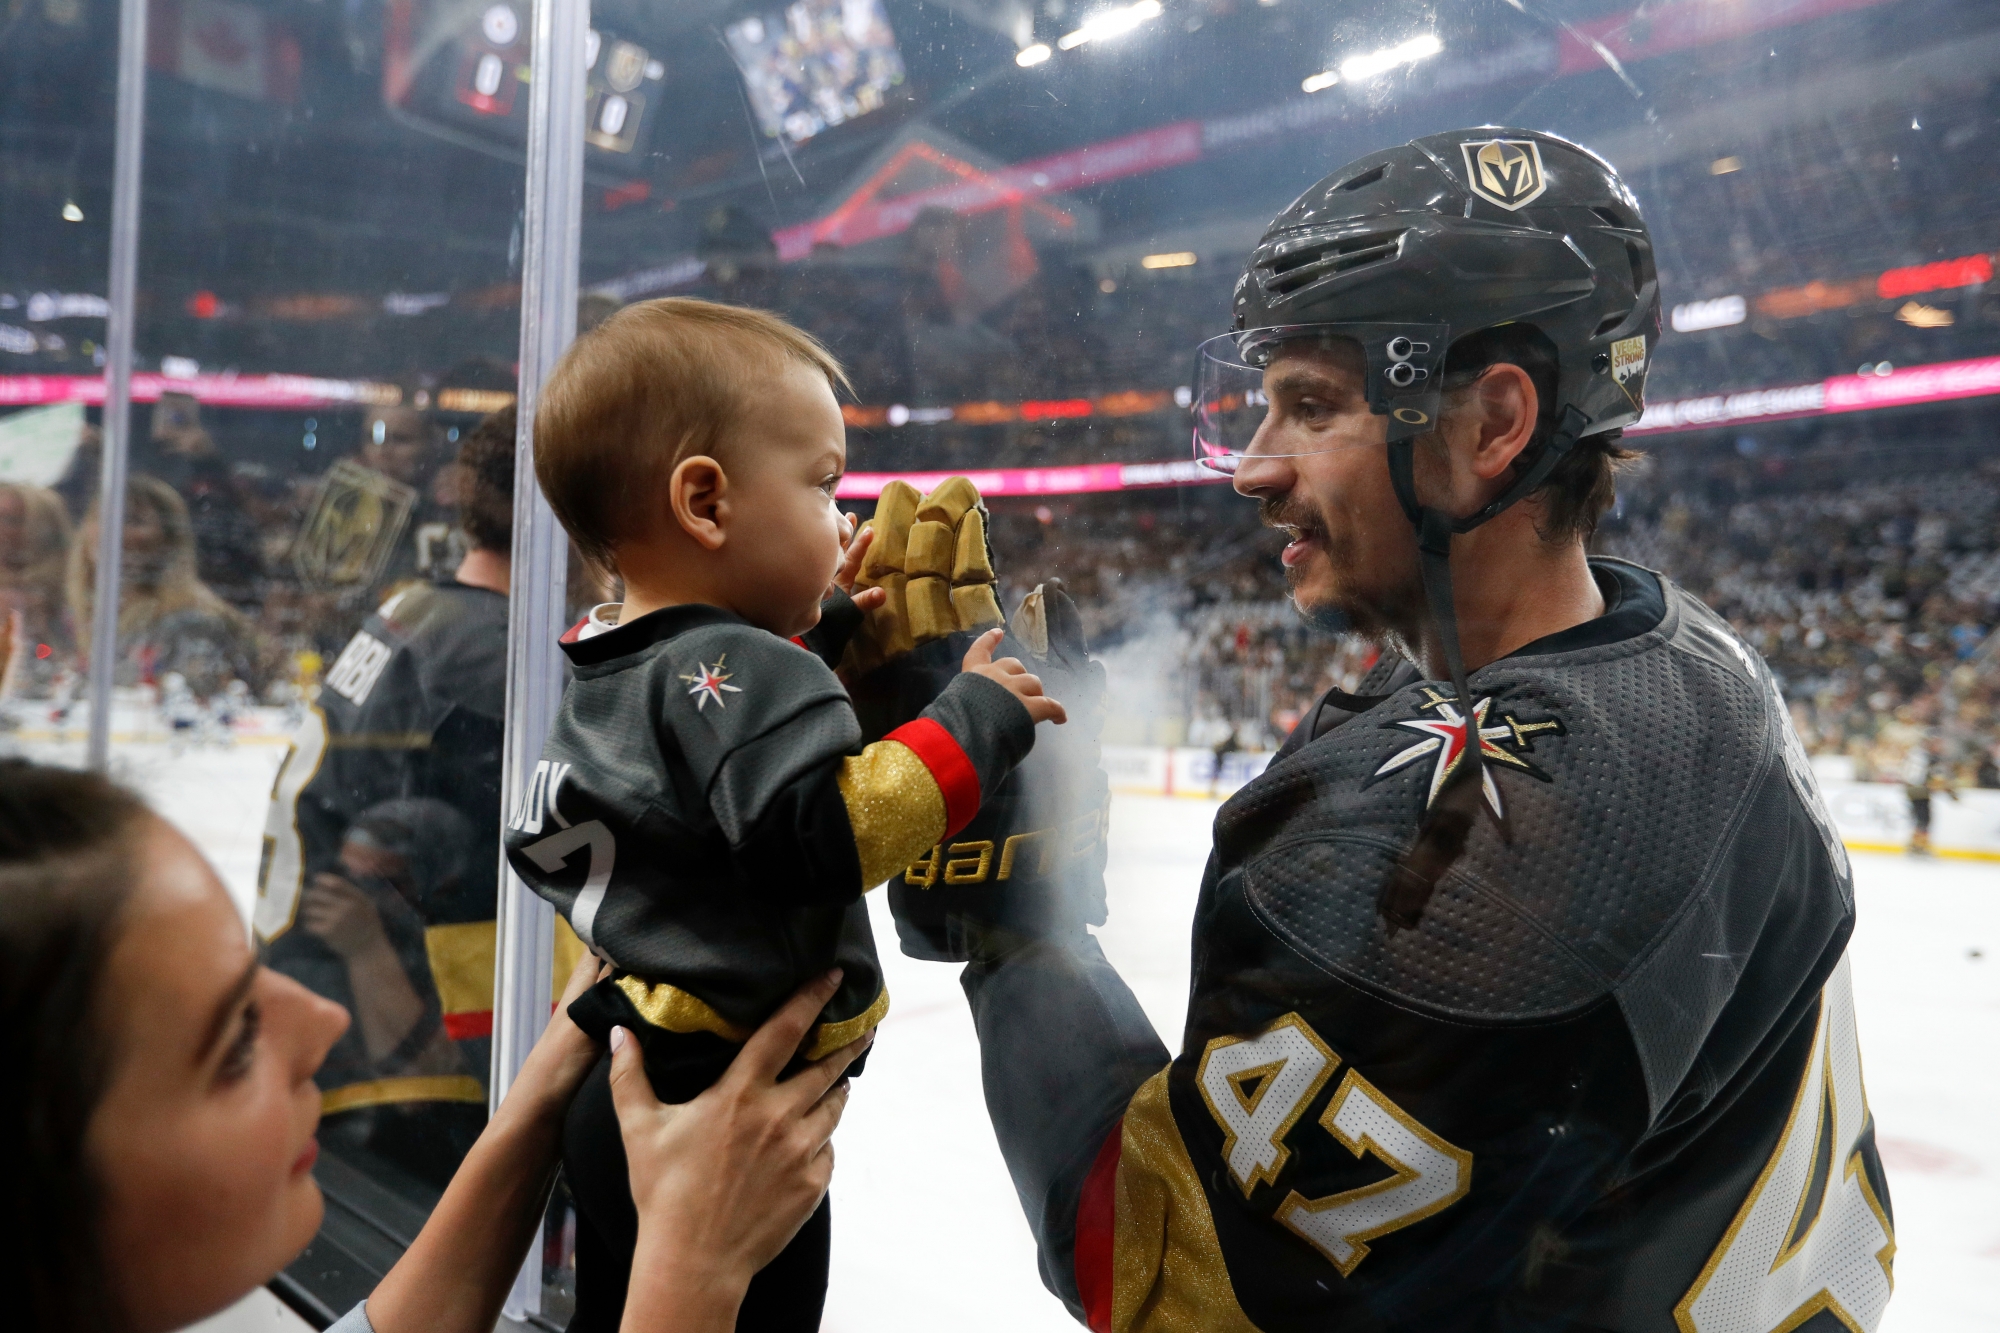 Vegas Golden Knights defenseman Luca Sbisa greets a young fan before Game 4 of the team's NHL hockey Western Conference finals against the Winnipeg Jets, Friday, May 18, 2018, in Las Vegas. (AP Photo/John Locher)r JETS GOLDEN KNIGHTS HOCKEY